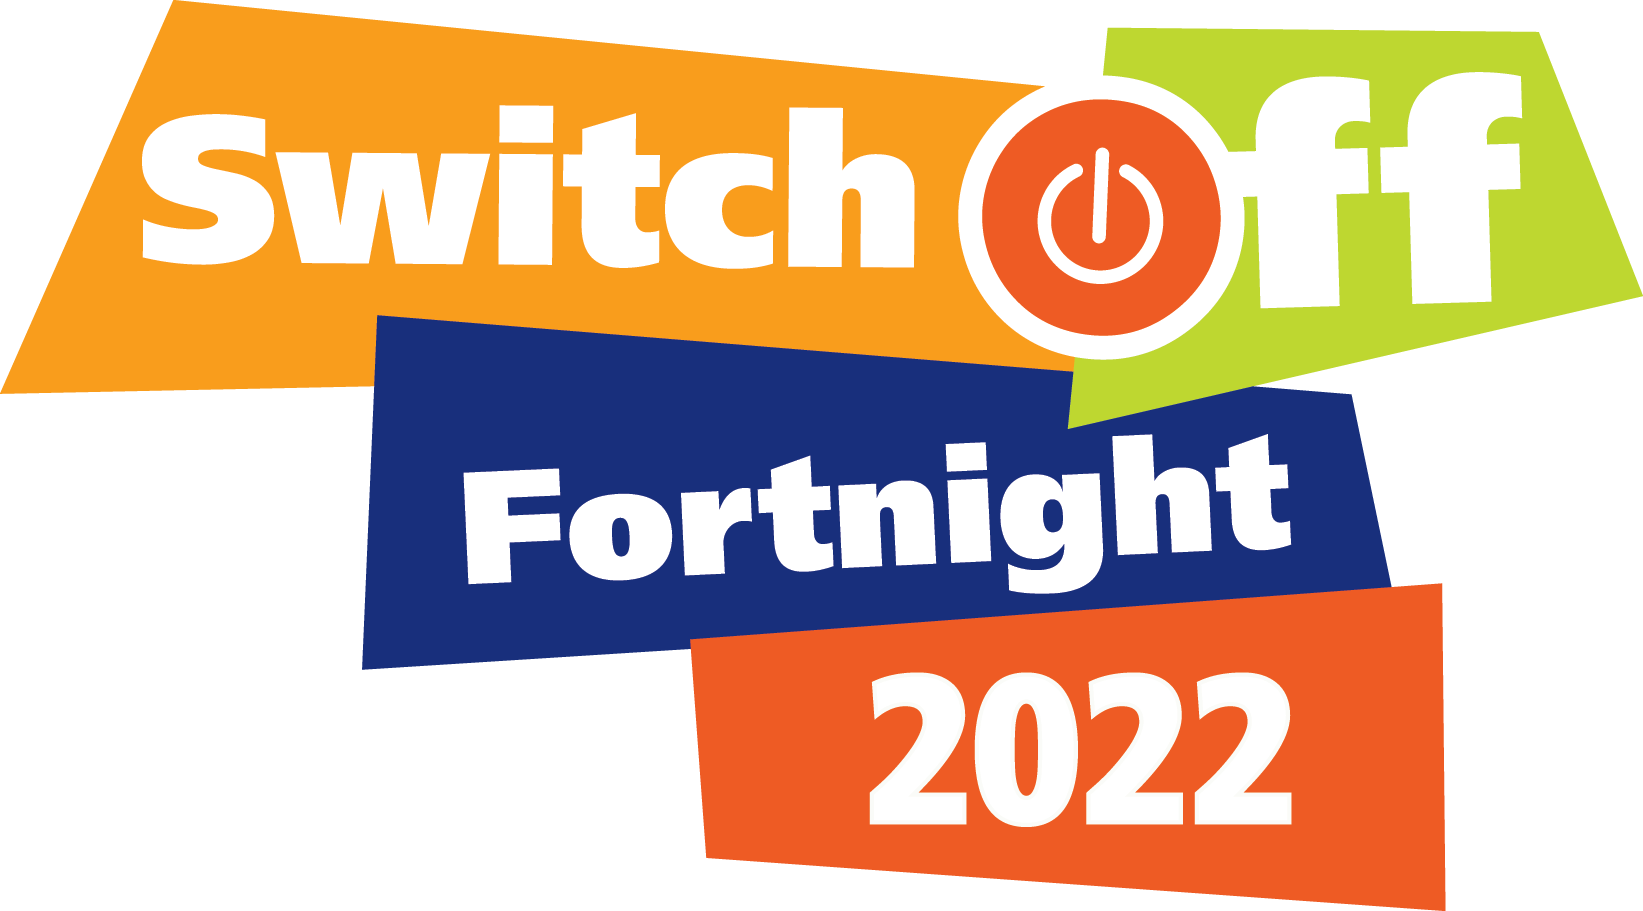 Switch Off Fortnight 2021